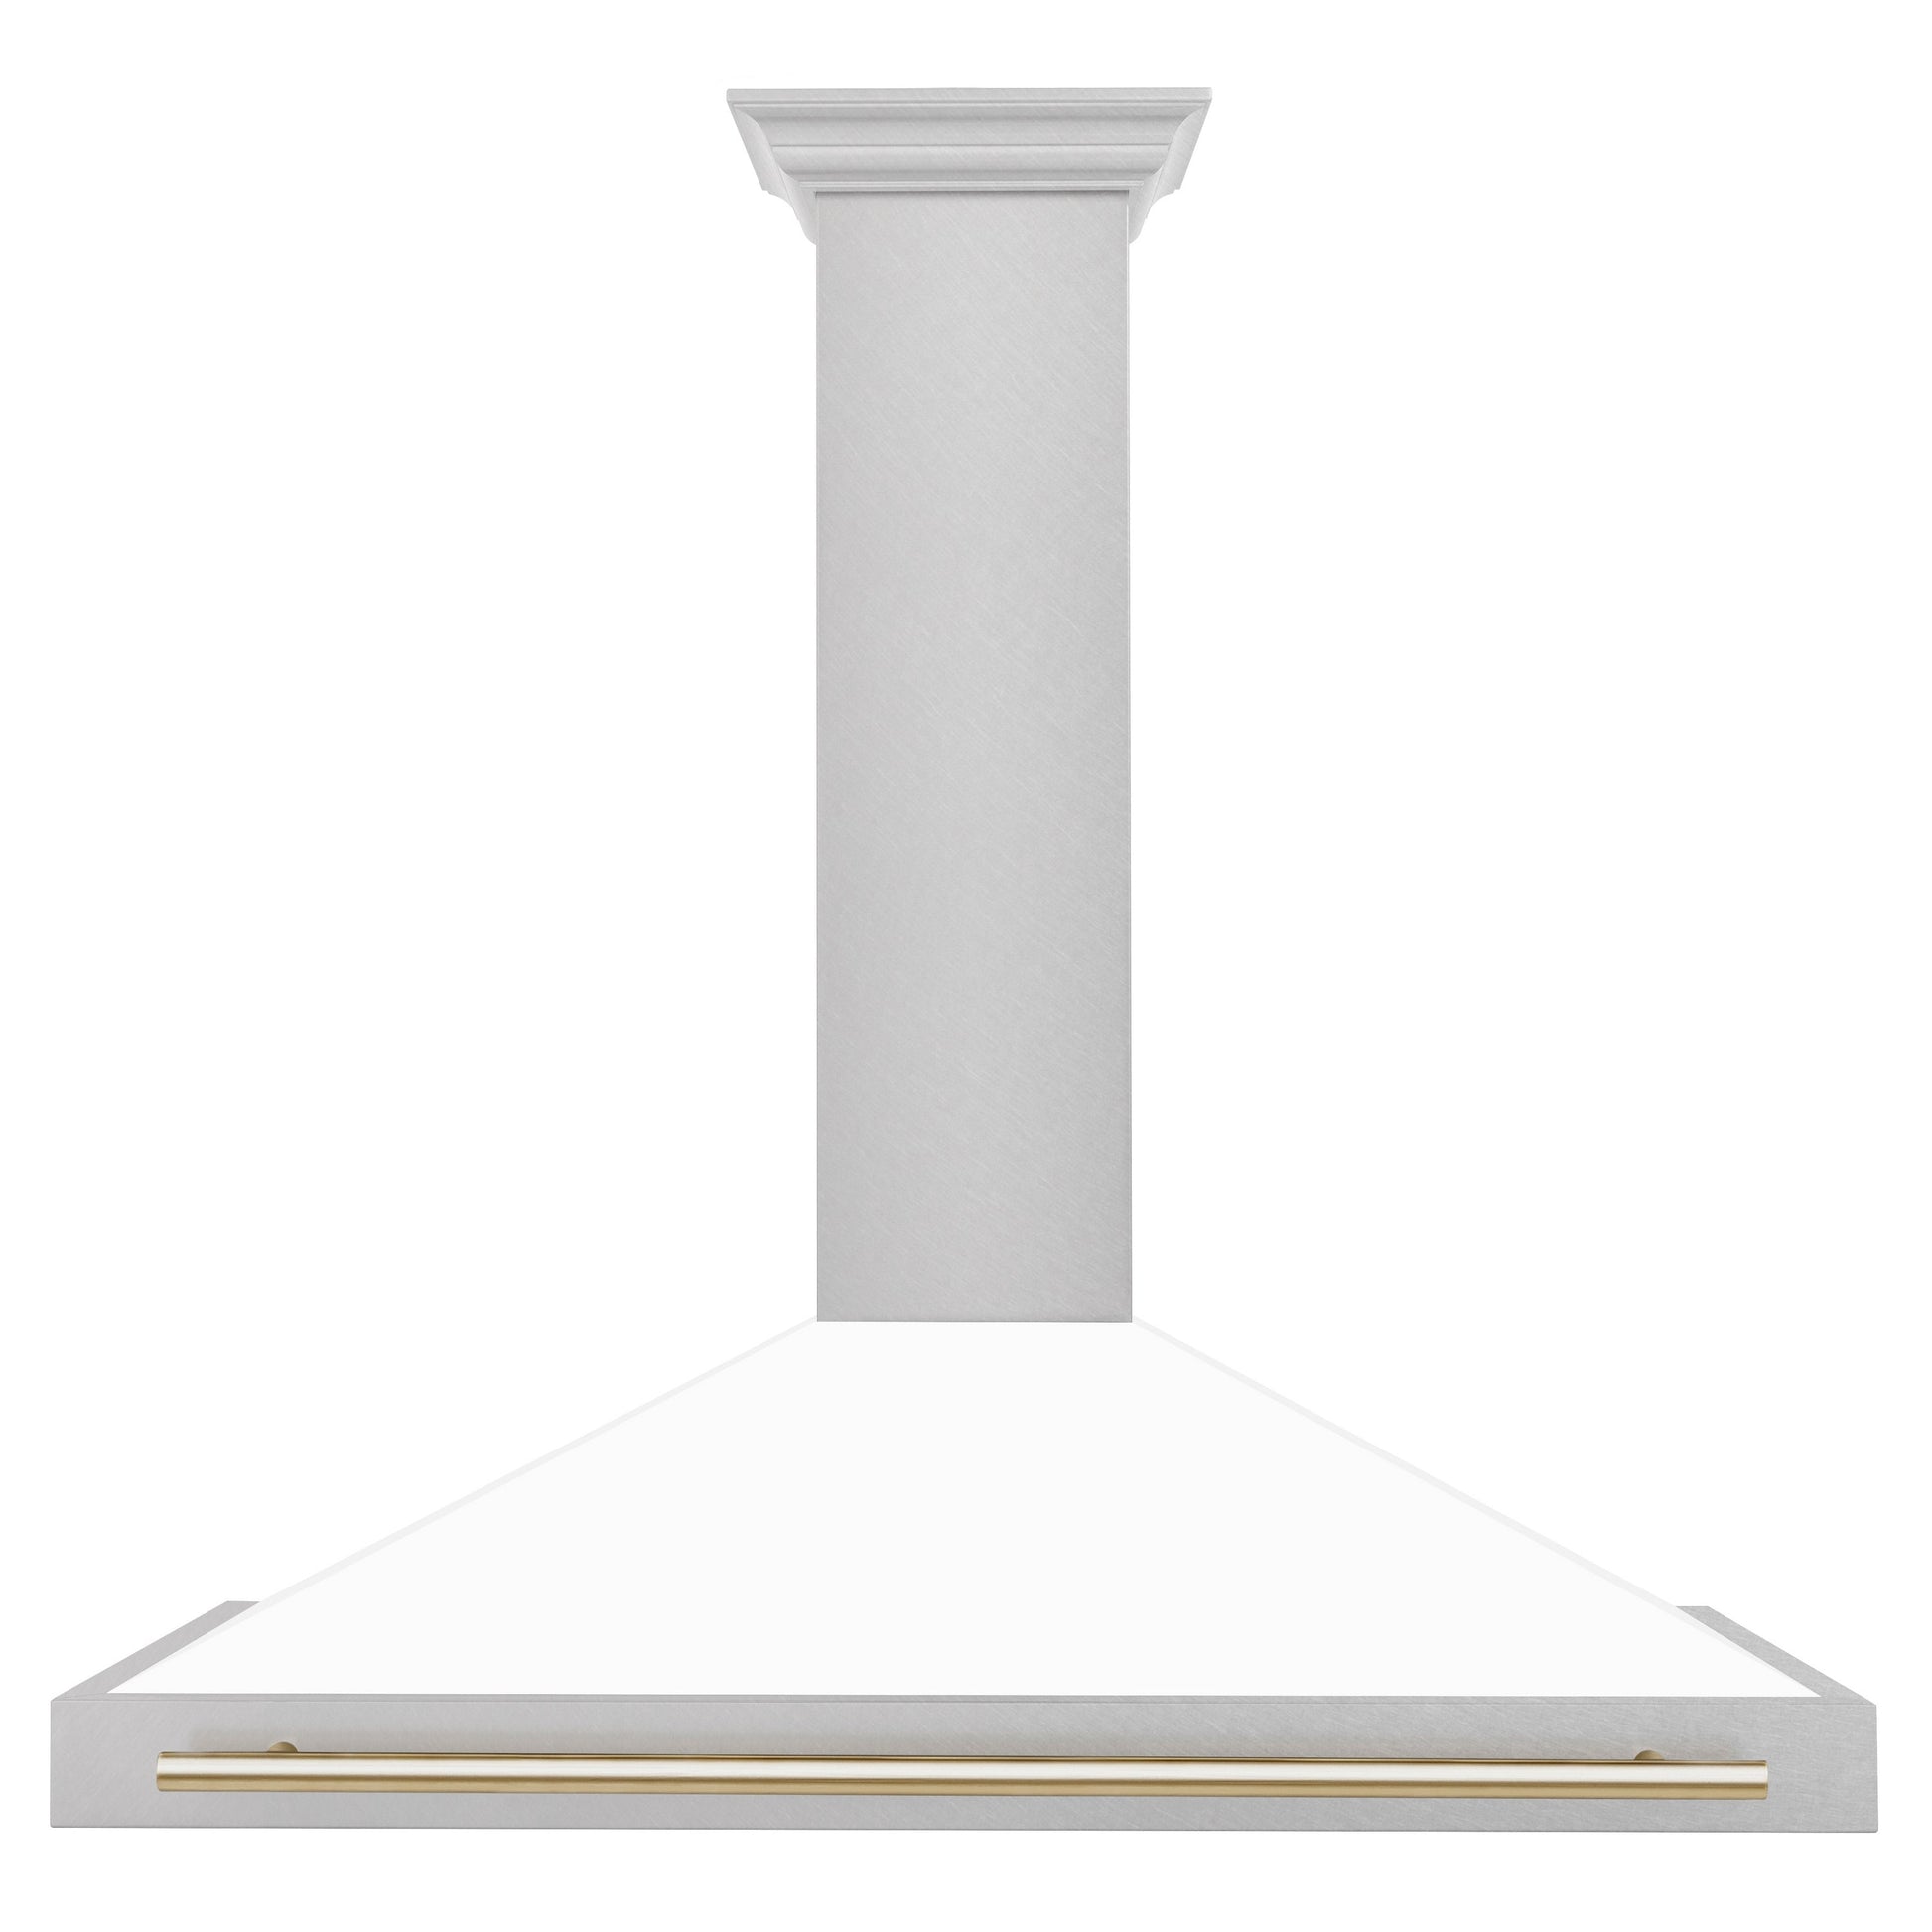 ZLINE 48" Autograph Edition Range Hood - DuraSnow Stainless Steel with Matte White Shell and Accented Handles